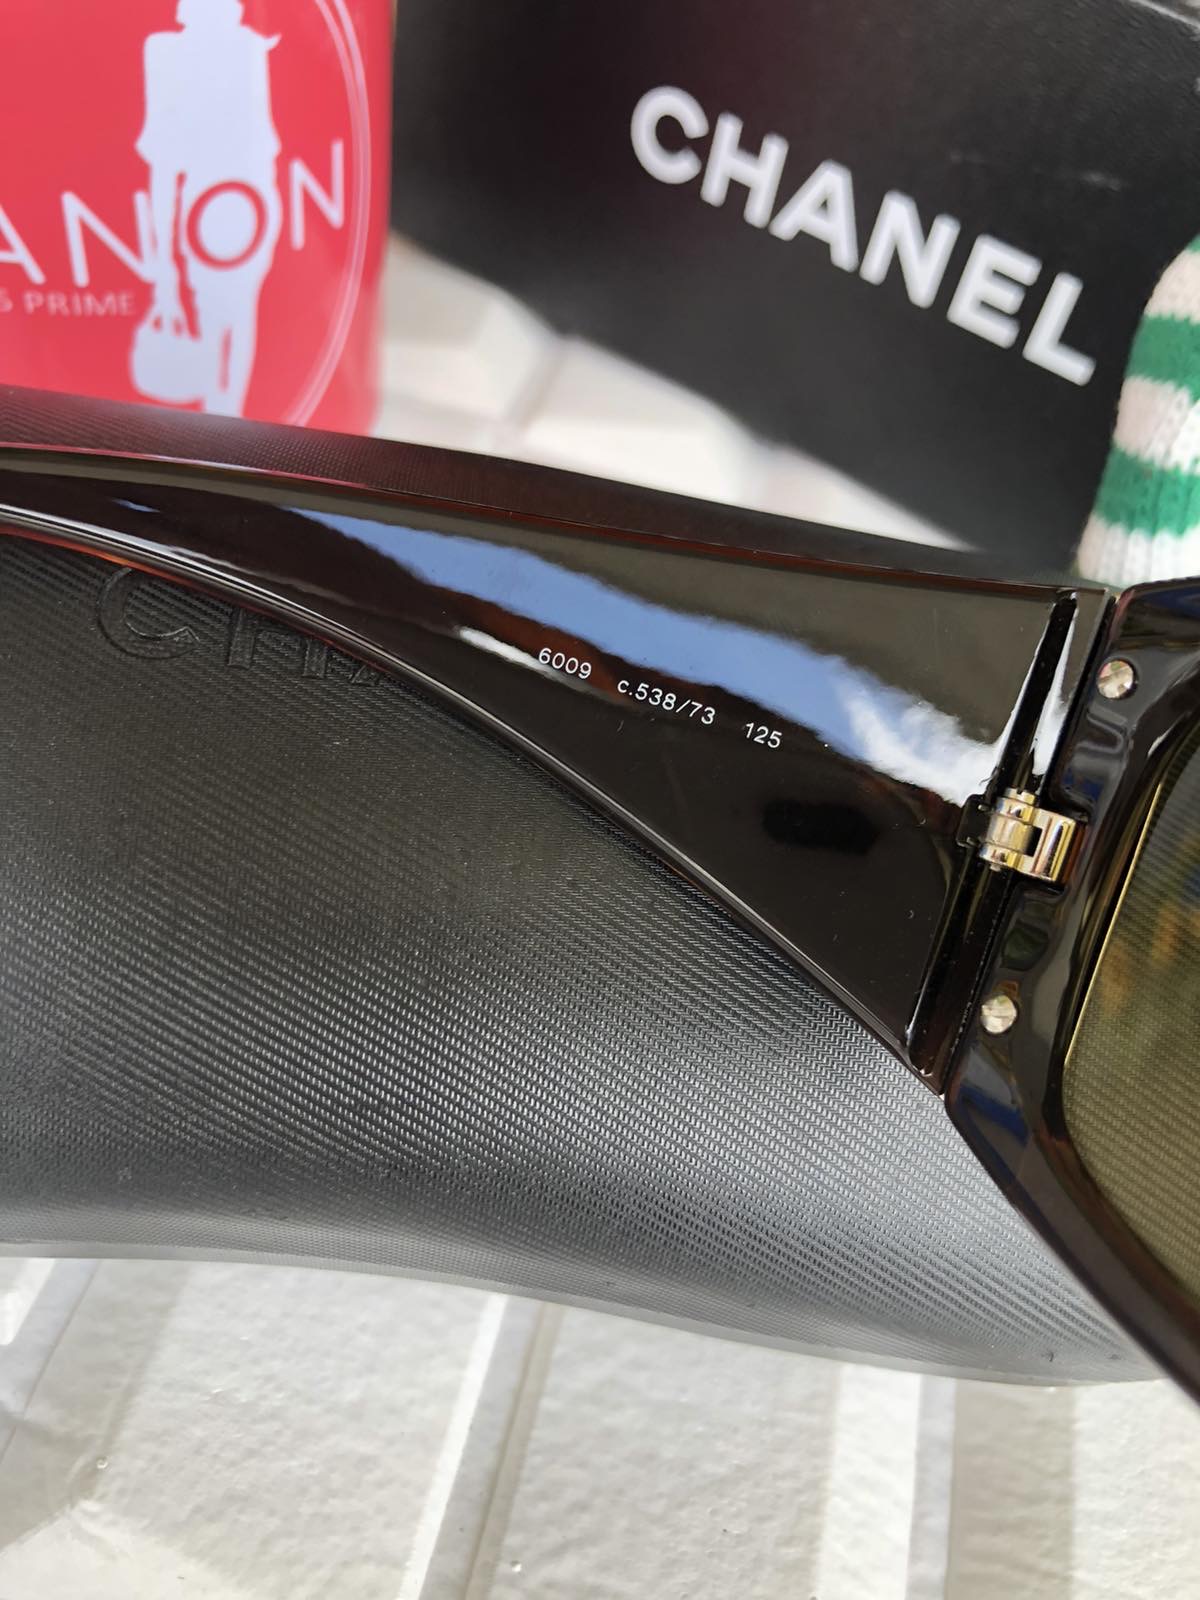 Chanel 6009 Black Gradient Lens Quilted Shield Sunglasses. Made in Italy.